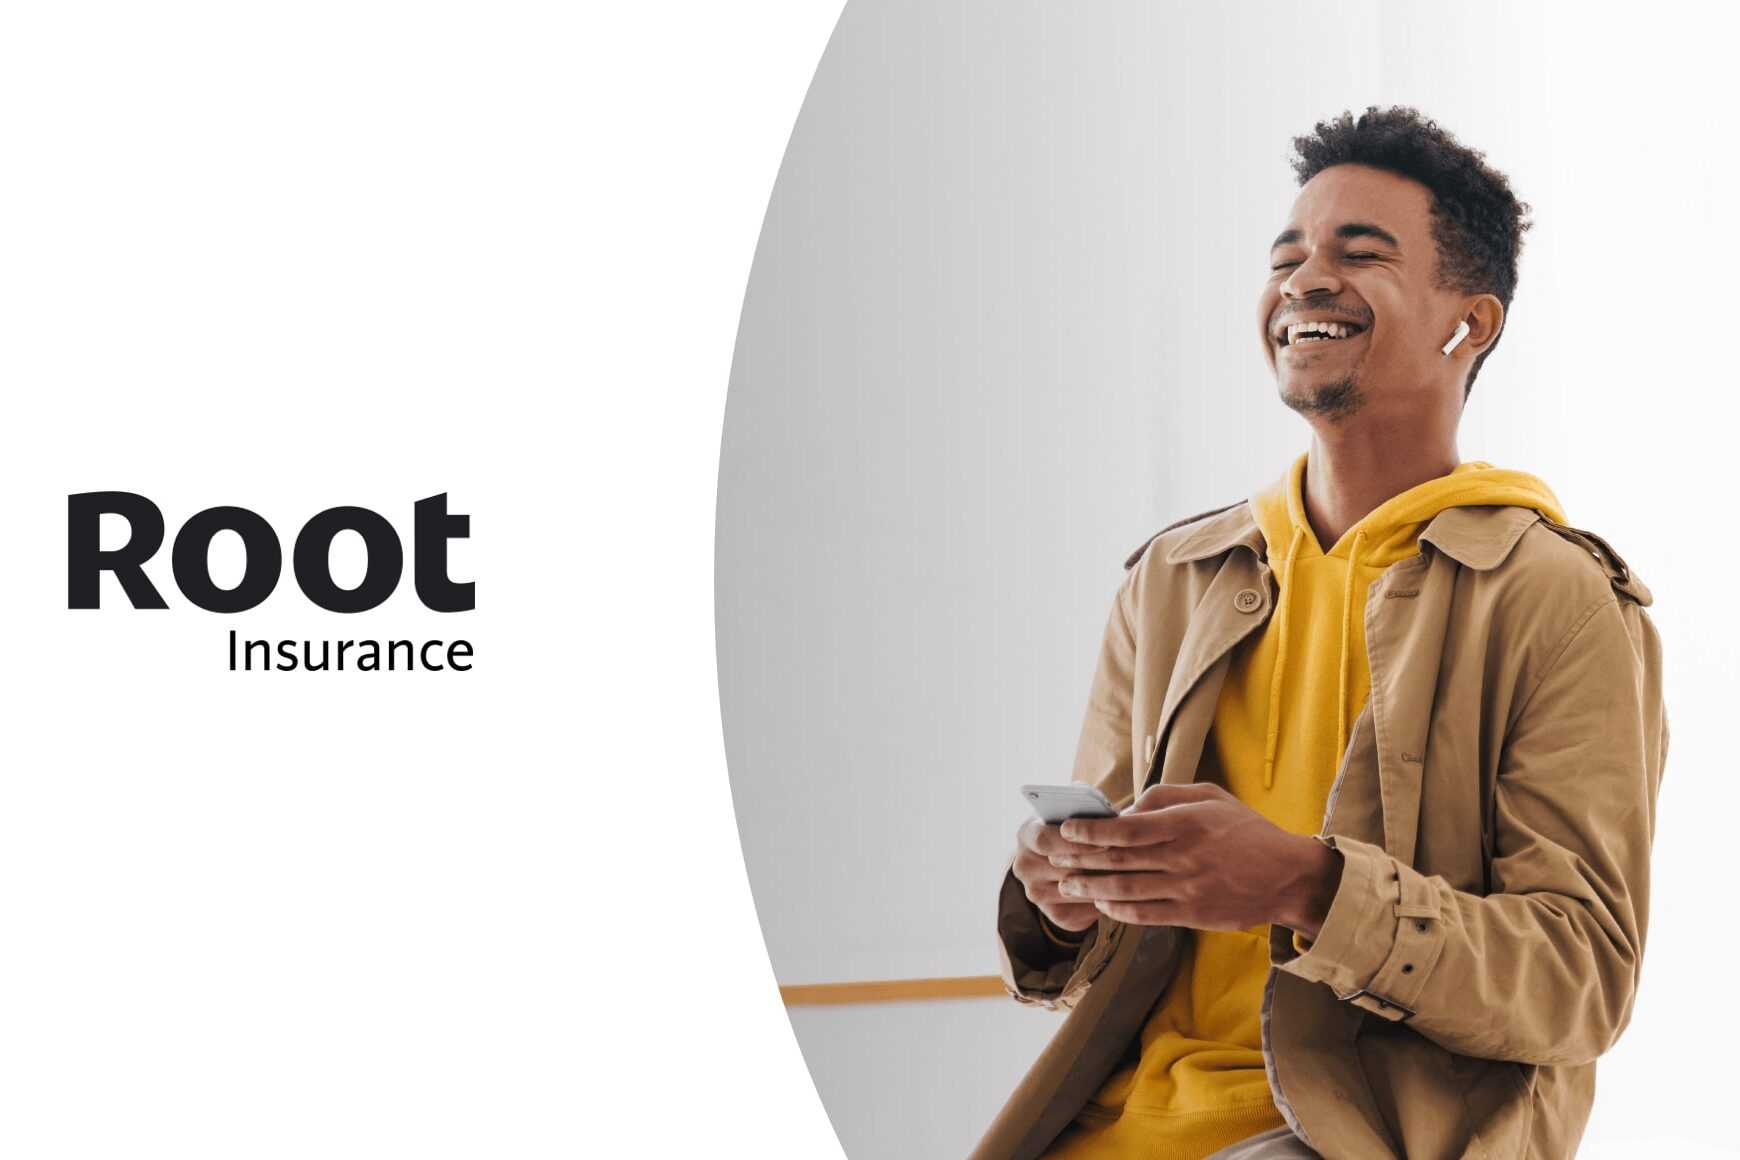 See how Root Insurance is revolutionizing CX with Talkdesk.